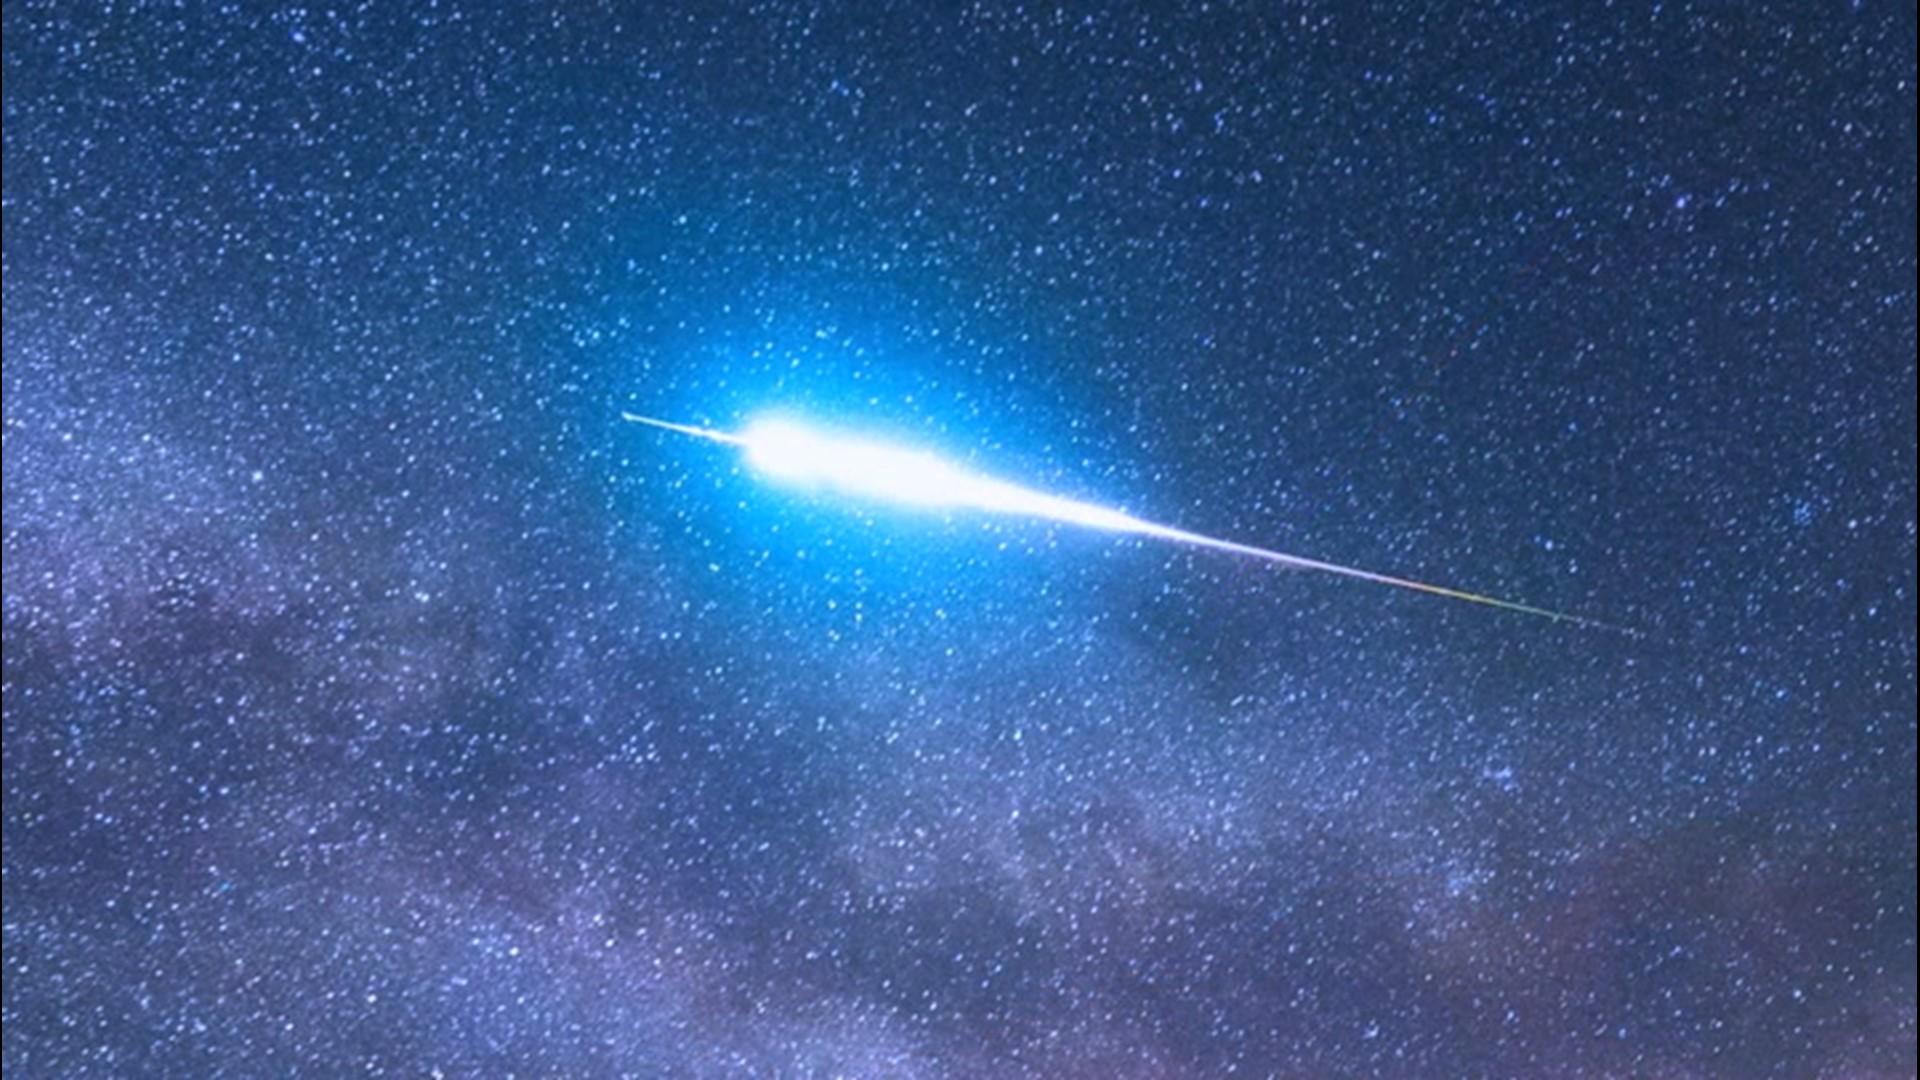 Two meteor showers and an eclipse make up the top astronomy events for the month of November this year. Make sure to mark these events down on your calendar.